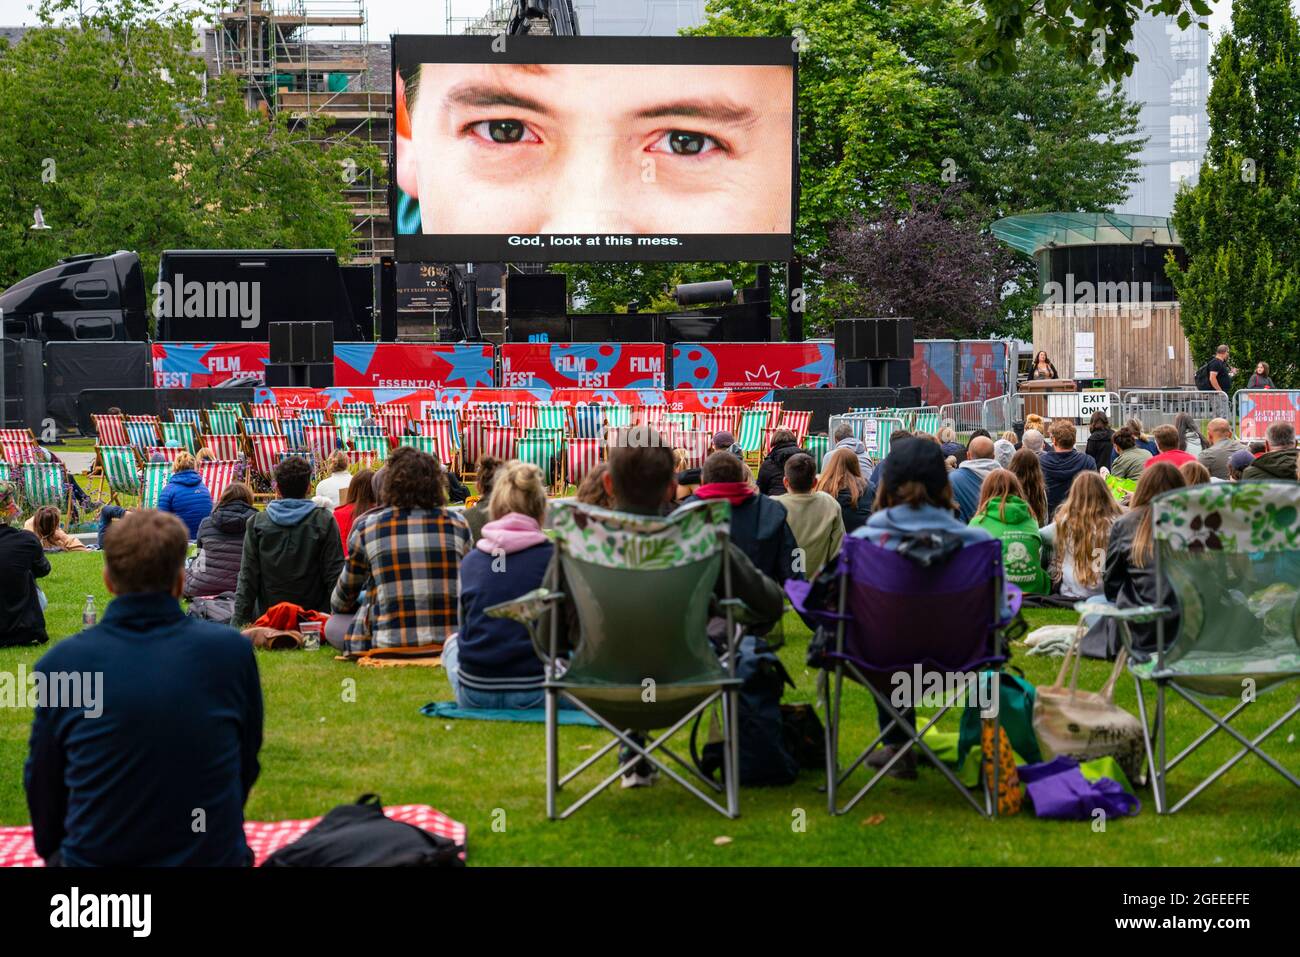 Edinburgh, Scotland, UK. 19th August  2021. Audience watch an outdoor screening of the cult movie Ferris Bueller’s Day Off at the  Film Fest in the City outdoor cinema in St Andrew Square. This is one of the events taking place during the Edinburgh International Film Festival in the city.  Iain Masterton/Alamy Live news. Stock Photo